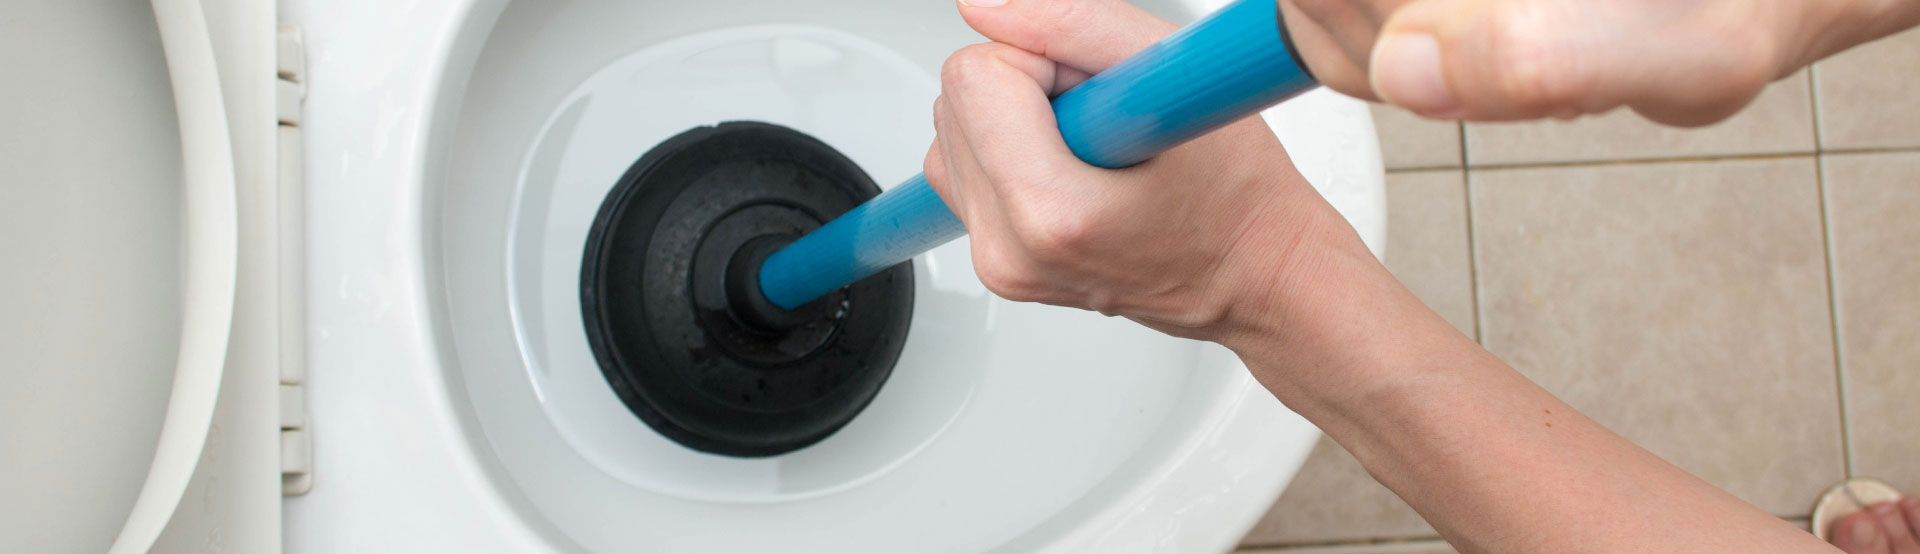 Plunging a blocked toilet